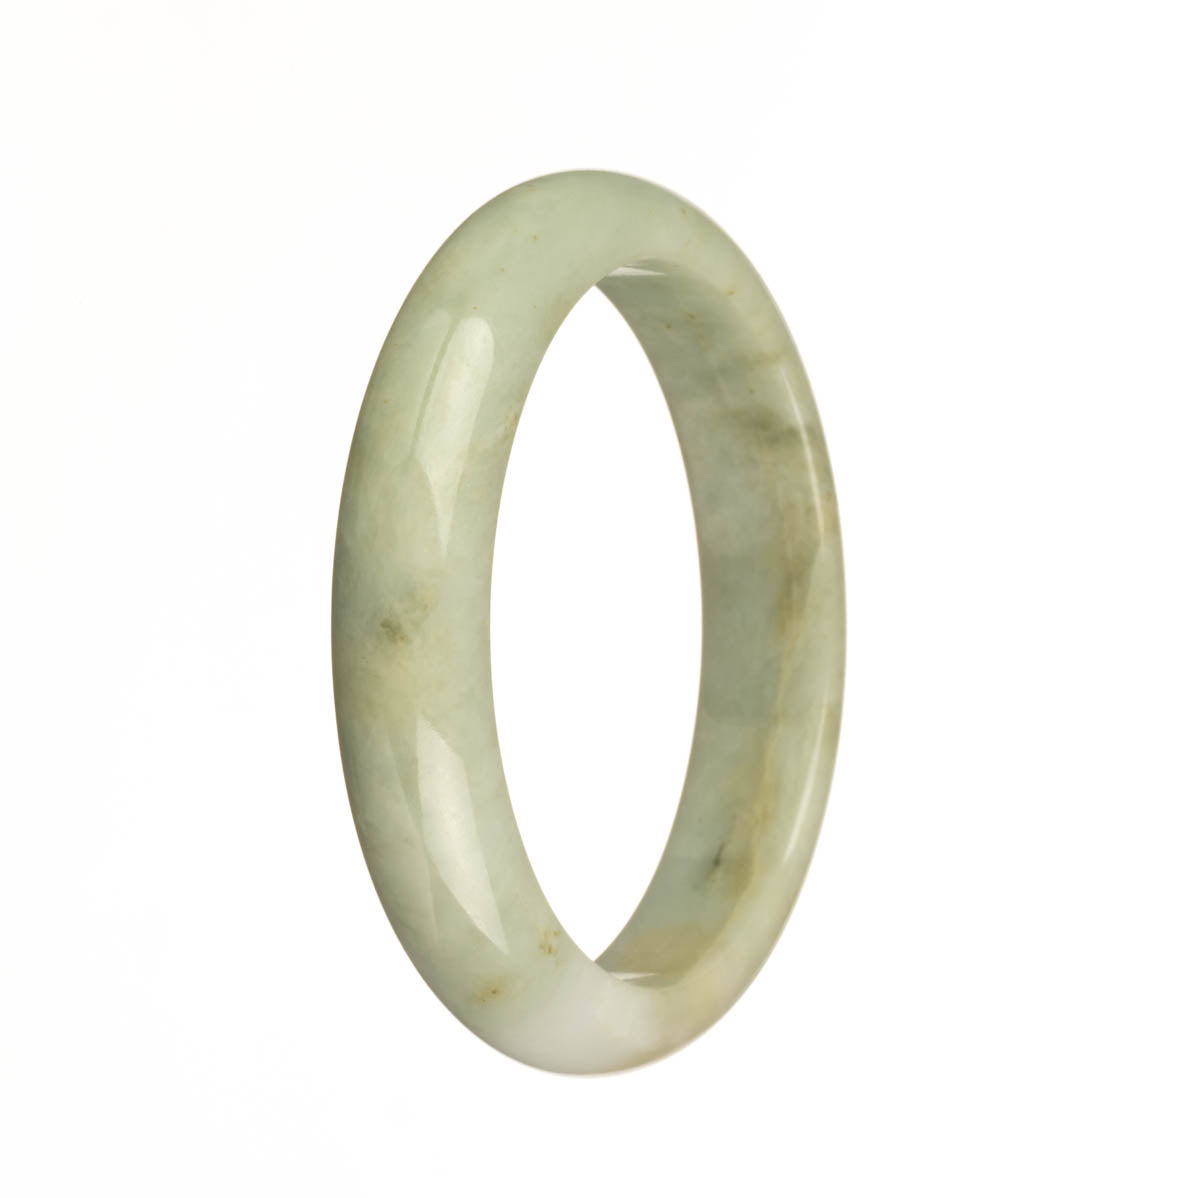 Authentic Untreated Pale Green and White with Yellow Patches Jadeite Jade Bracelet - 57mm Half Moon